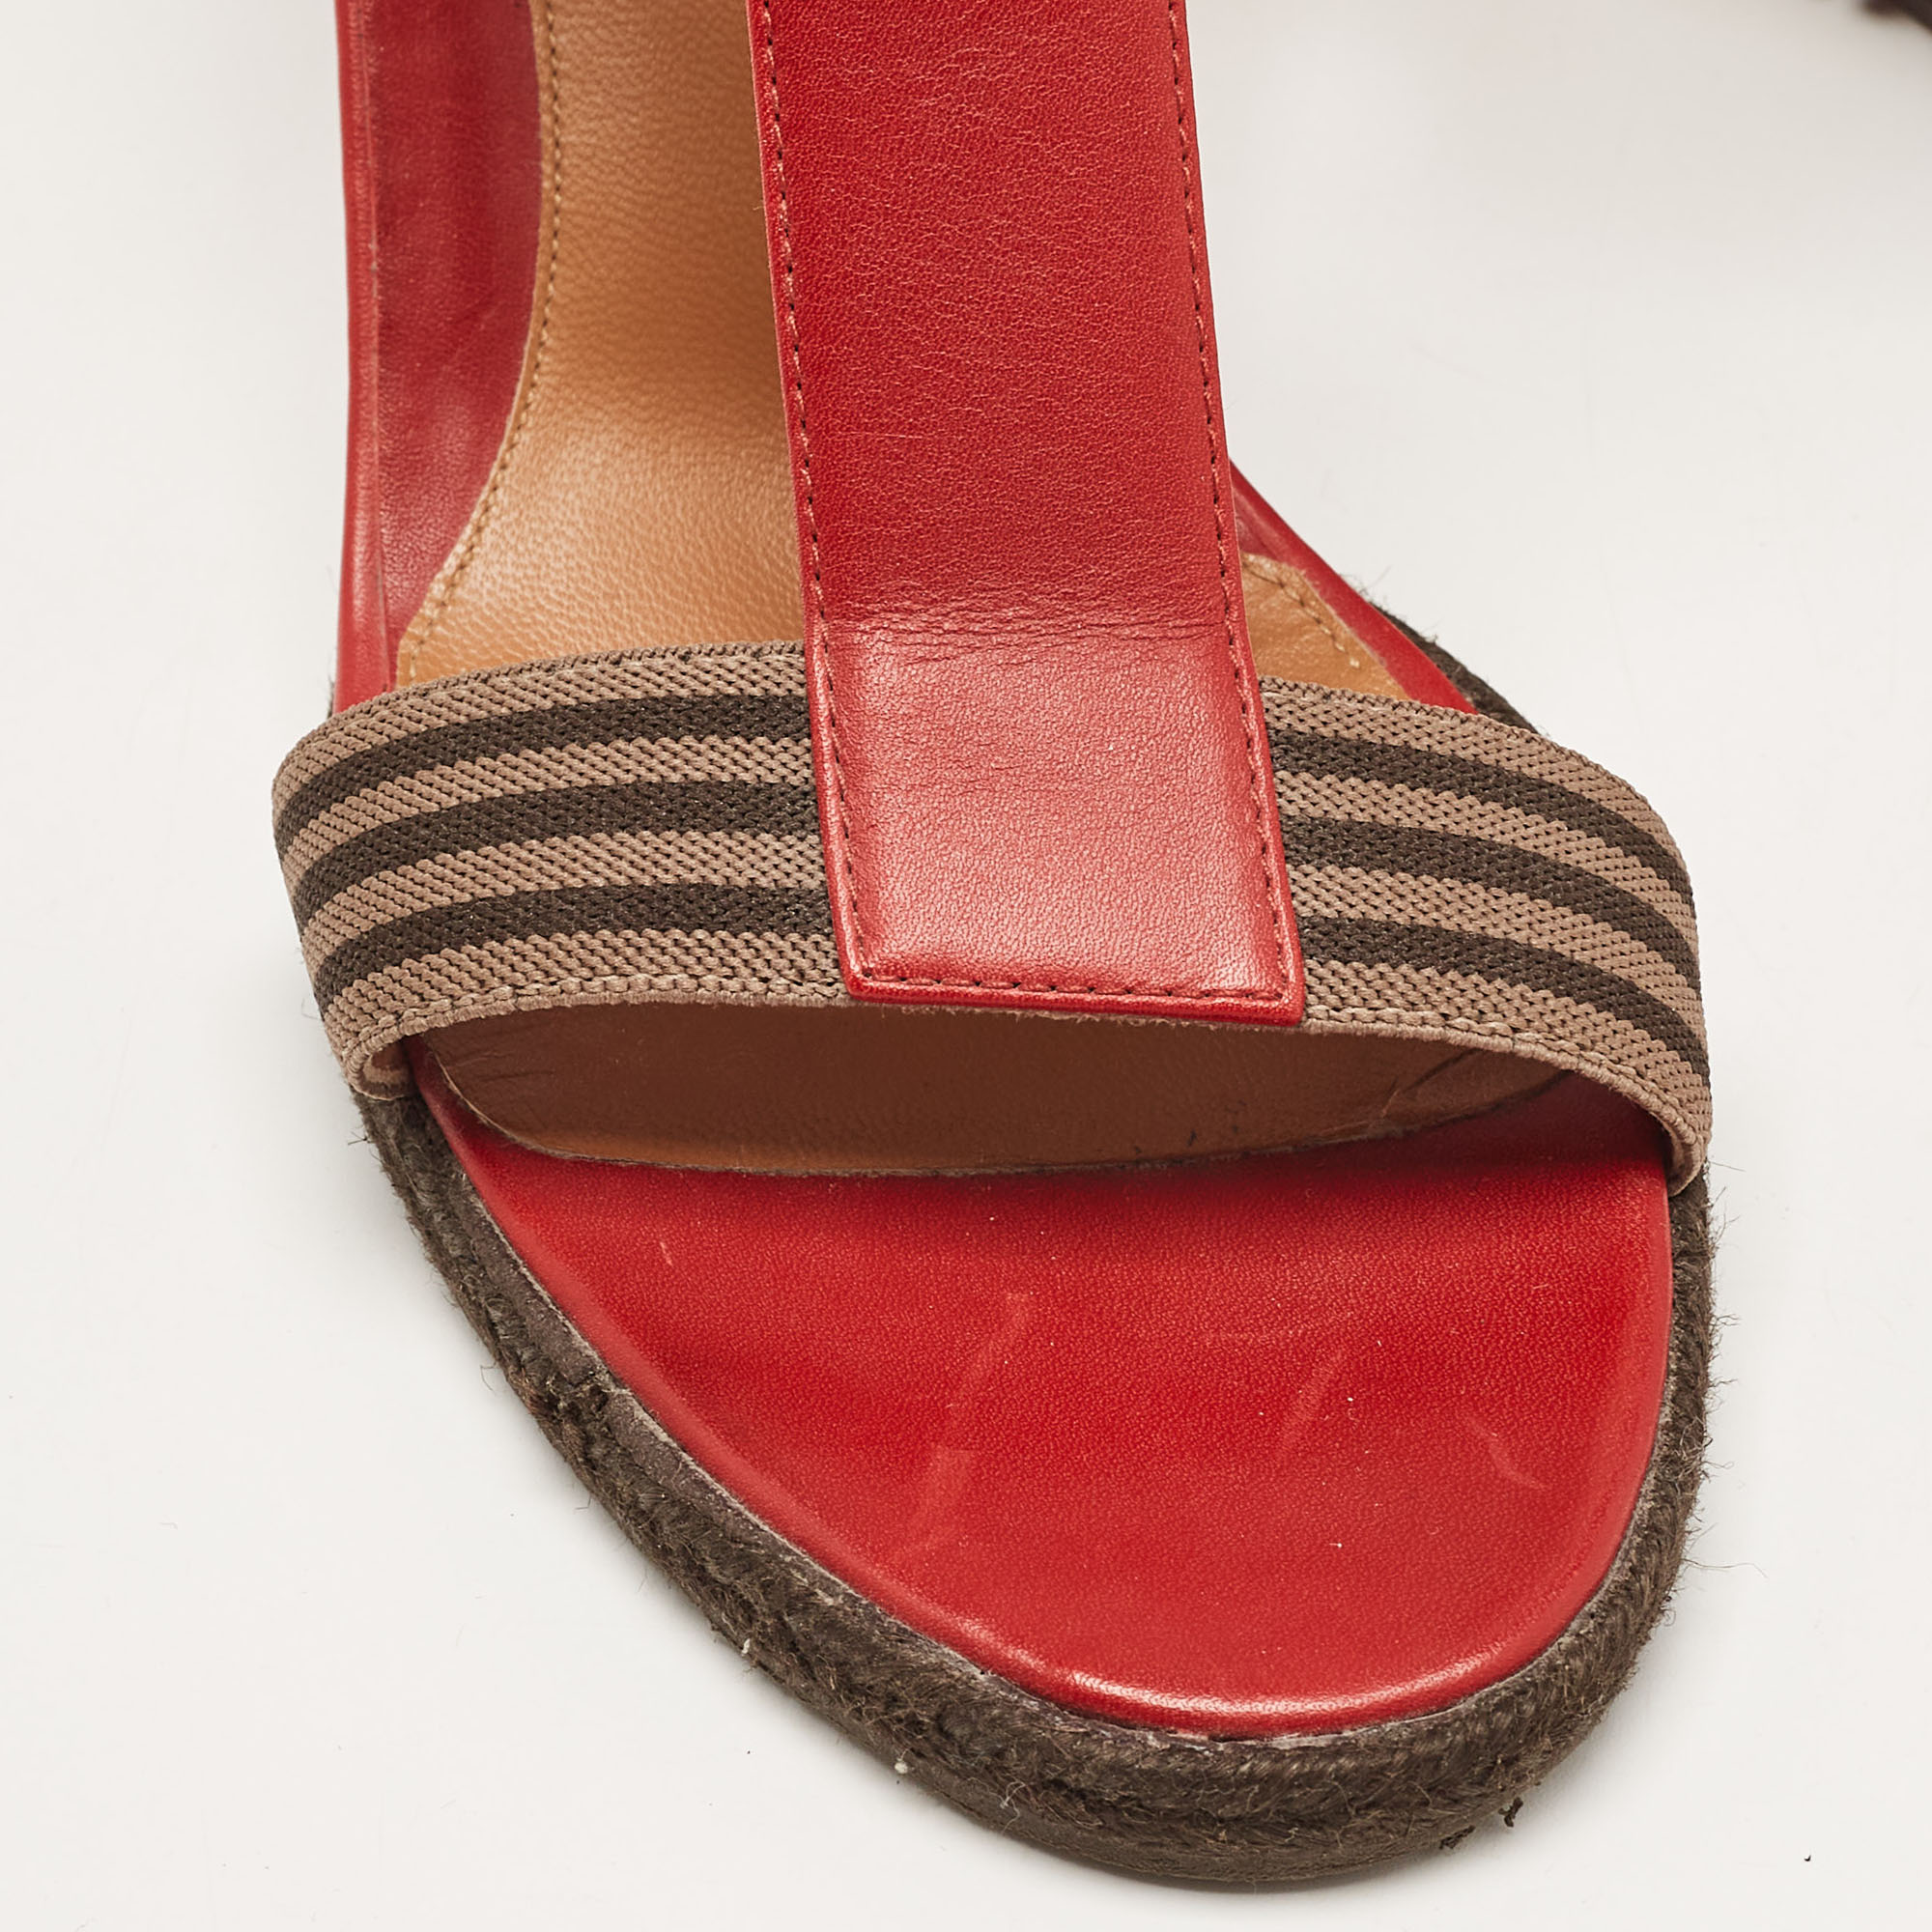 Fendi Red/Brown Leather And Elastic T-Strap Espadrille Wedge Sandals Size 39